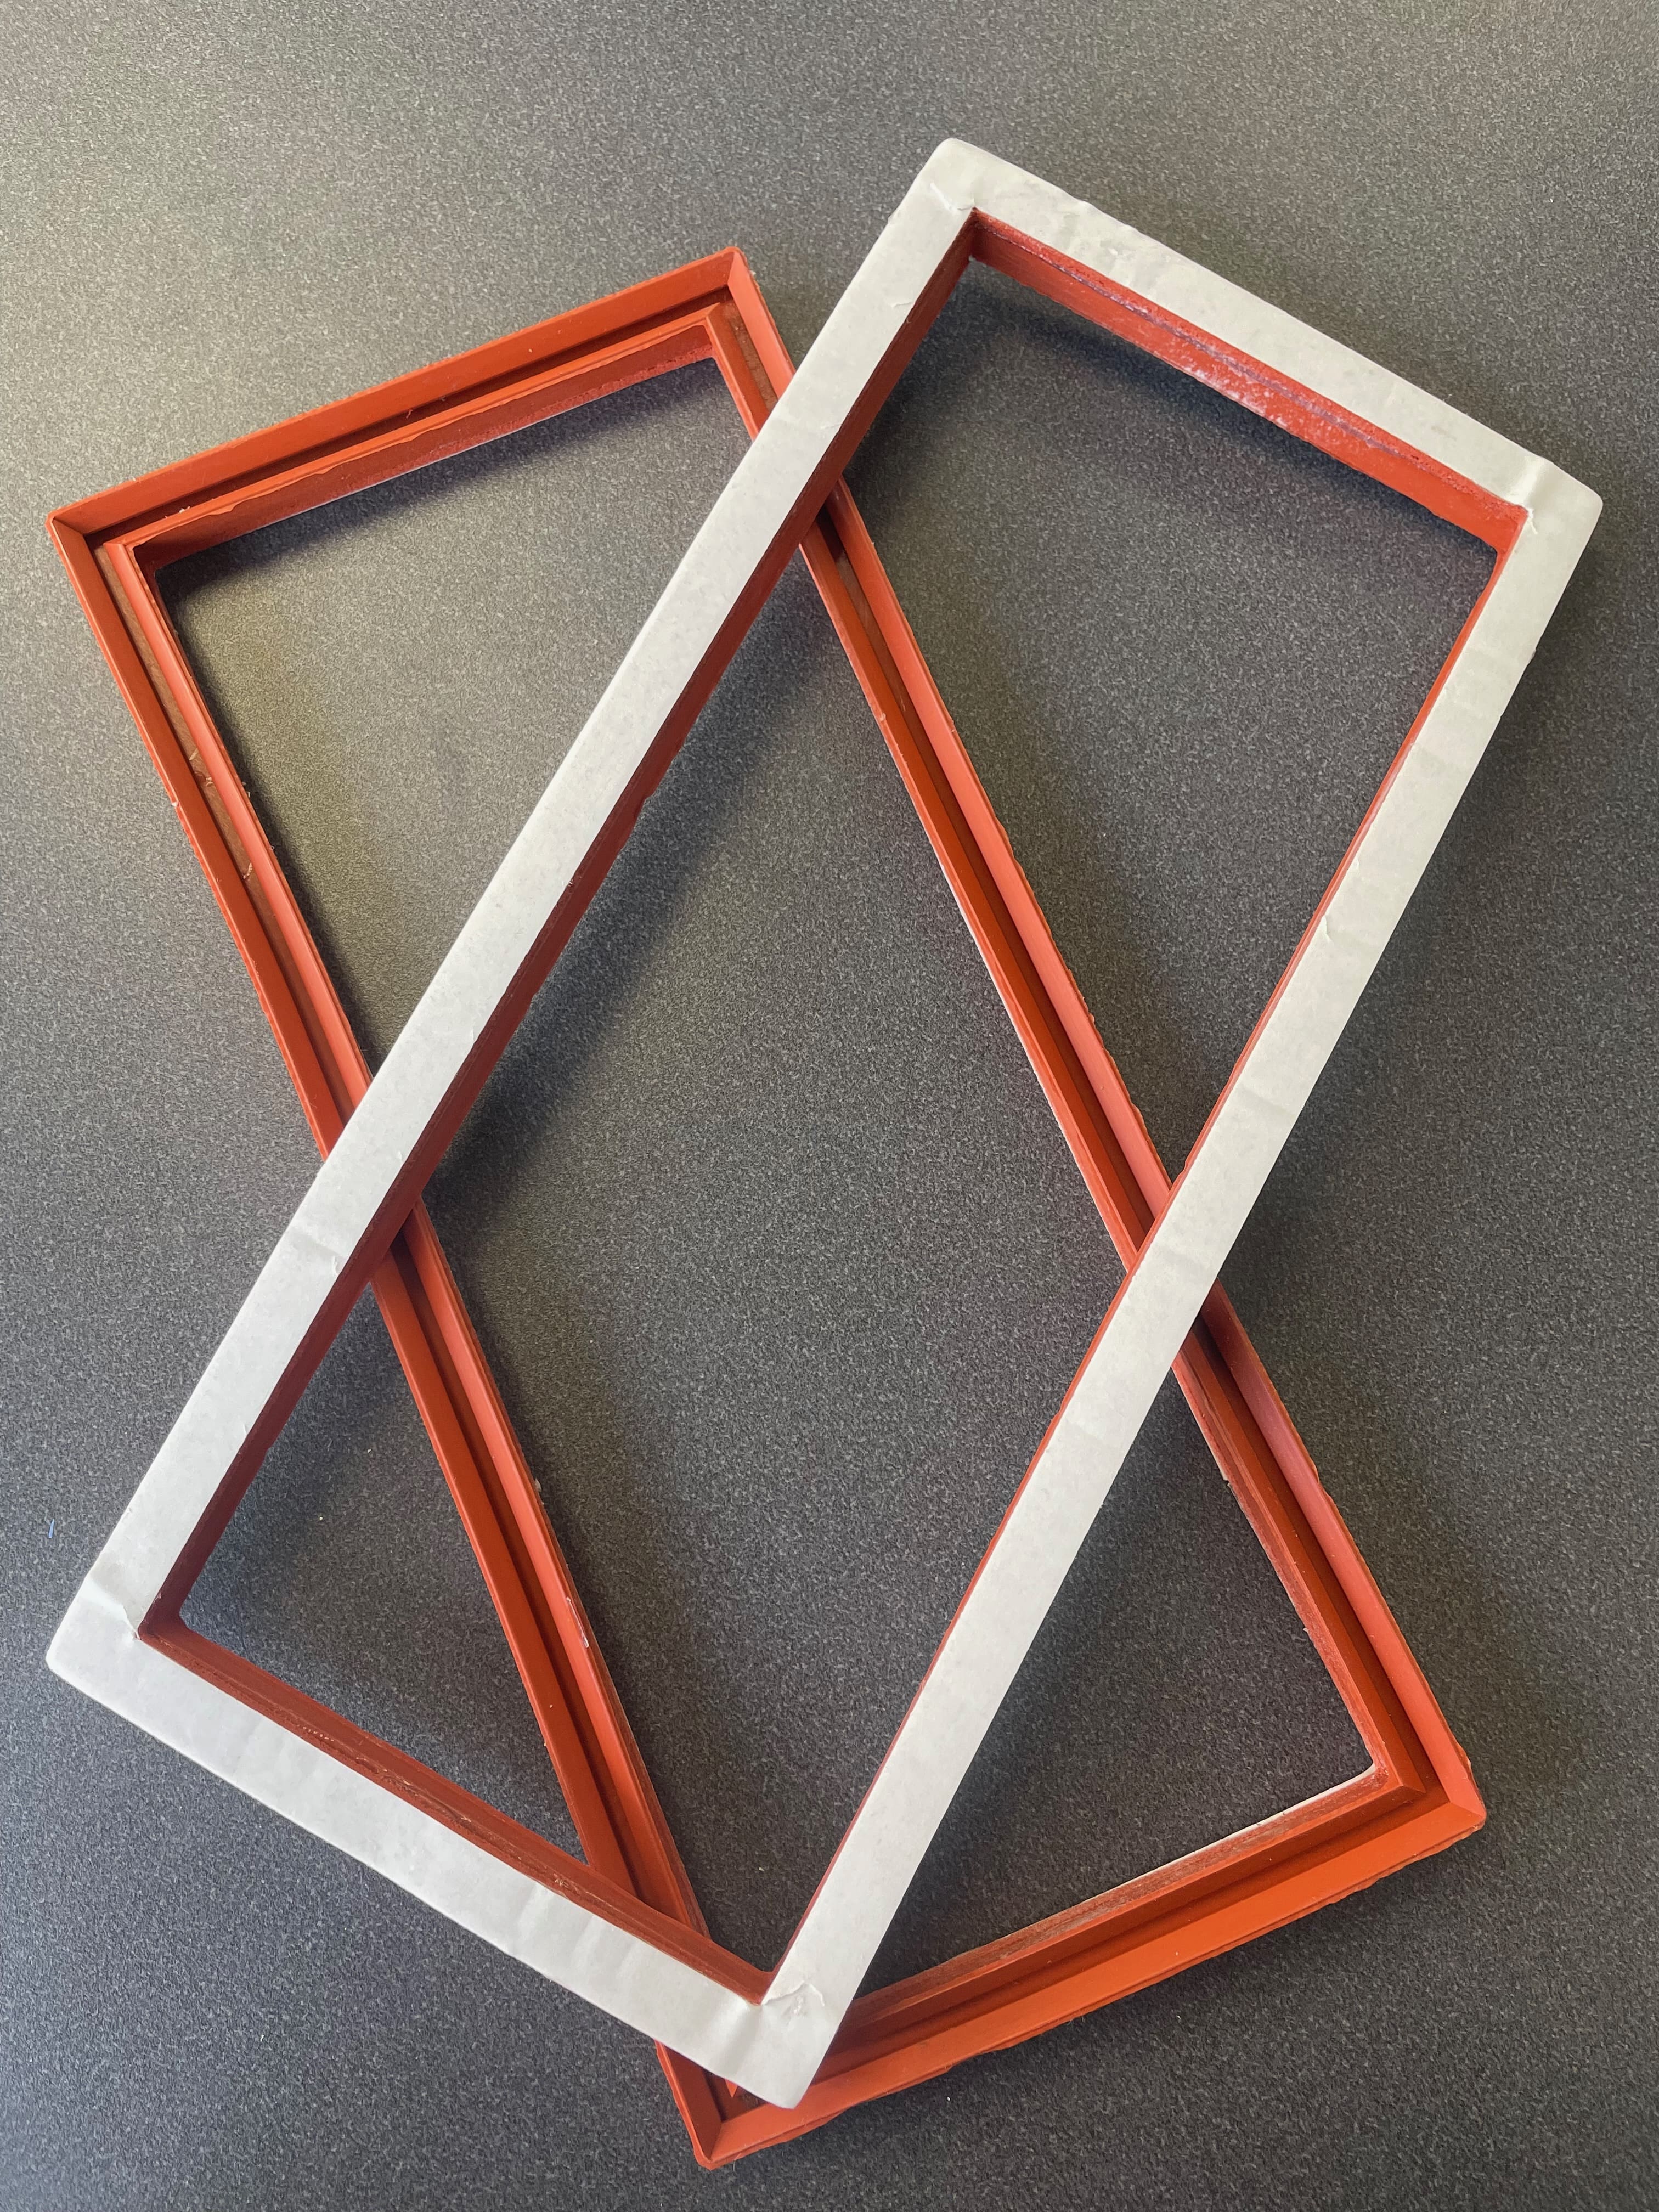 Two rectangular red molded rubber parts with adhesive strips on the top. One is sitting on top of the other. The bottom part is upside down.